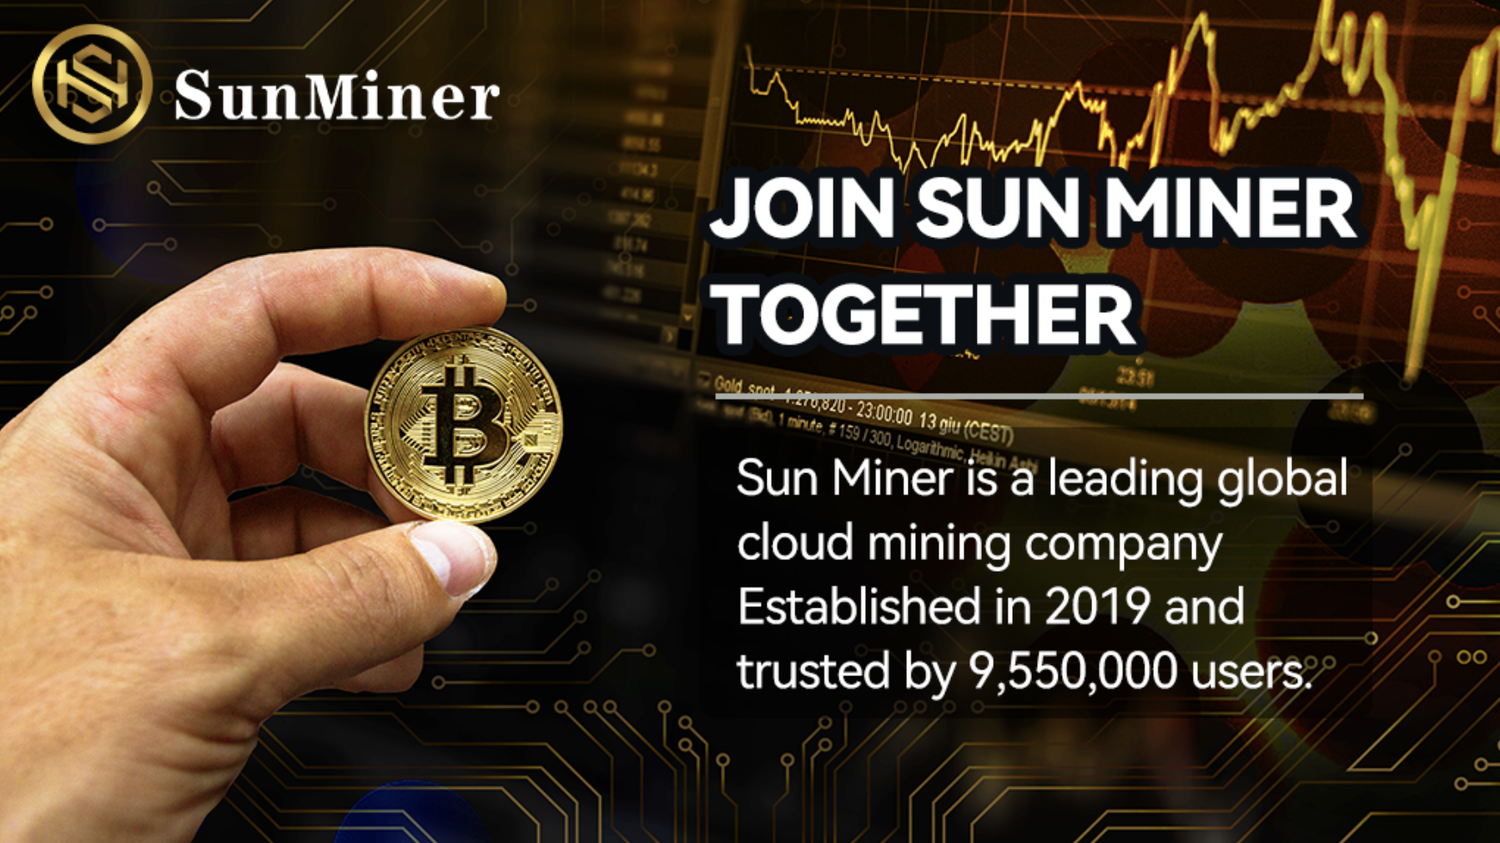 Discover the Lucrative Potential of Sunminer's $500-$1000 Daily Passive Income Opportunity